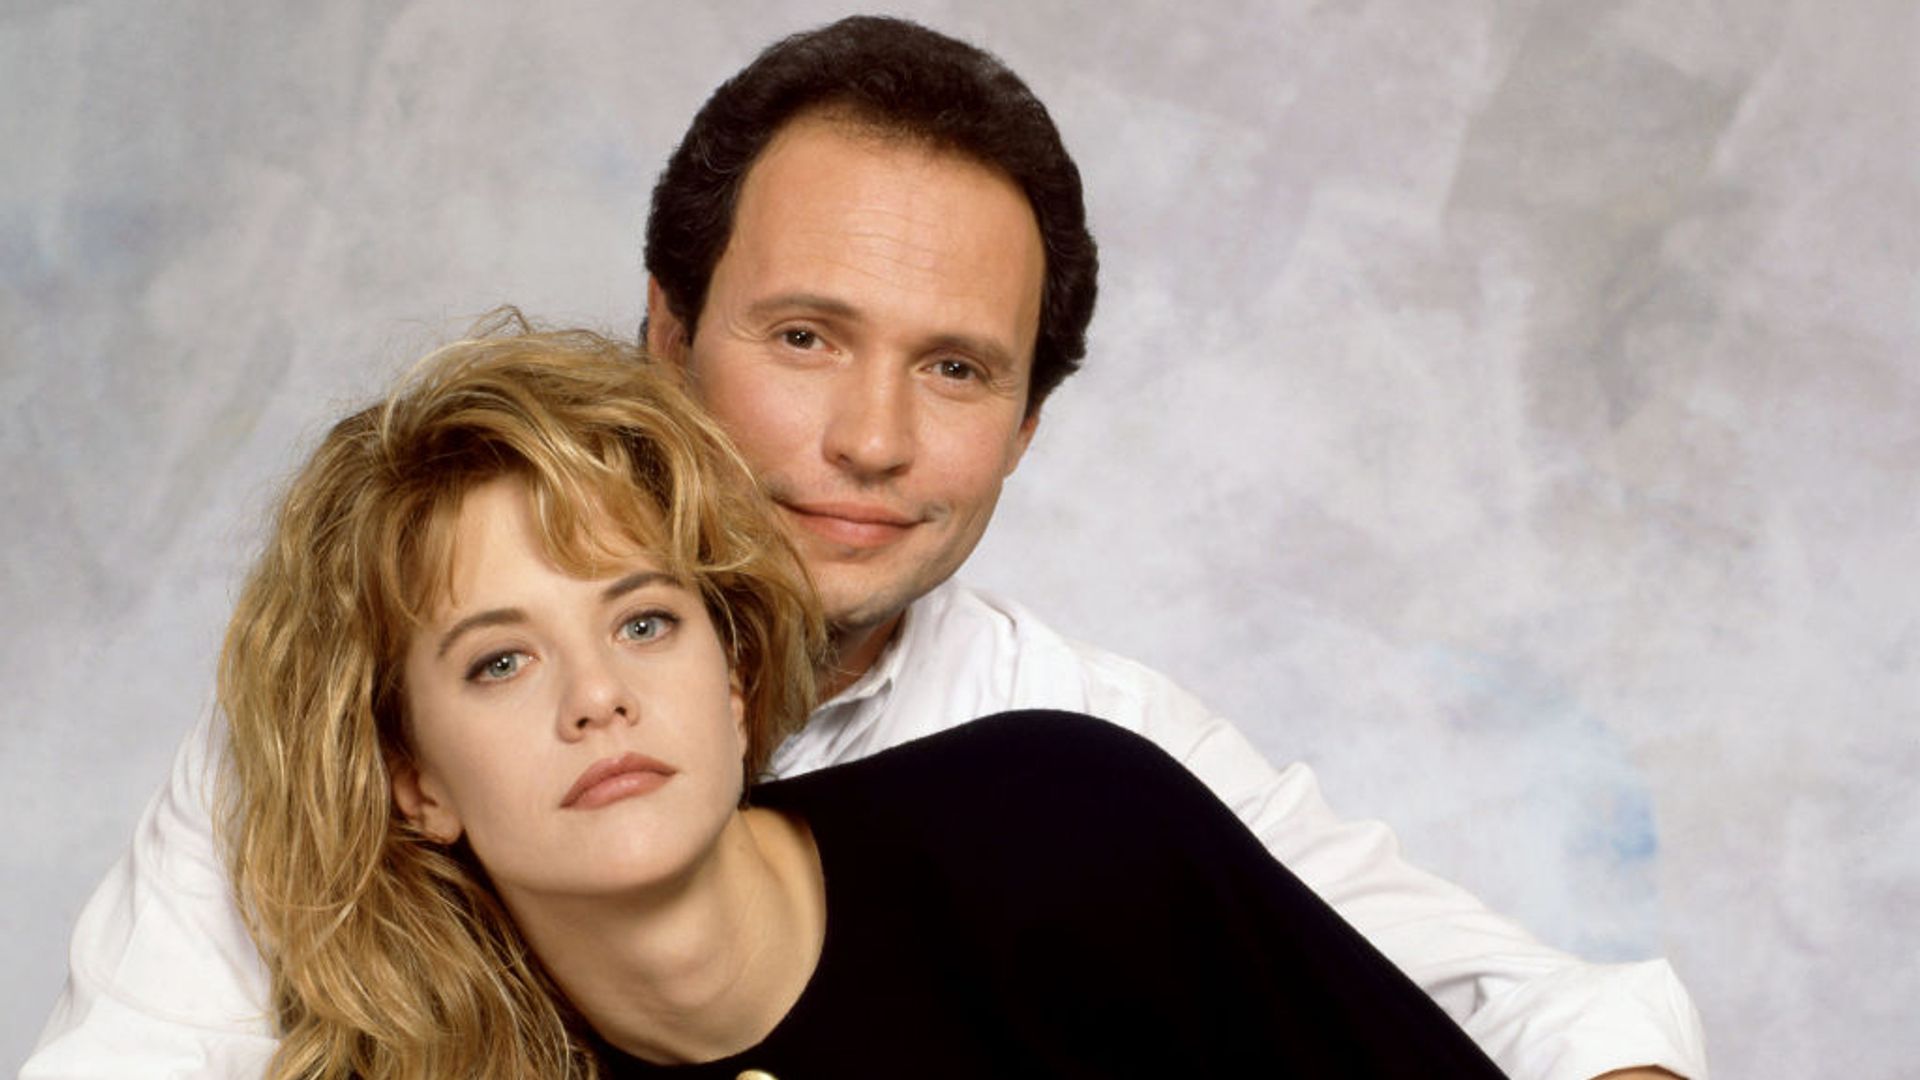 Meg Ryan admits to 'falling in love' with Billy Crystal as she honors him and his five-decade long marriage